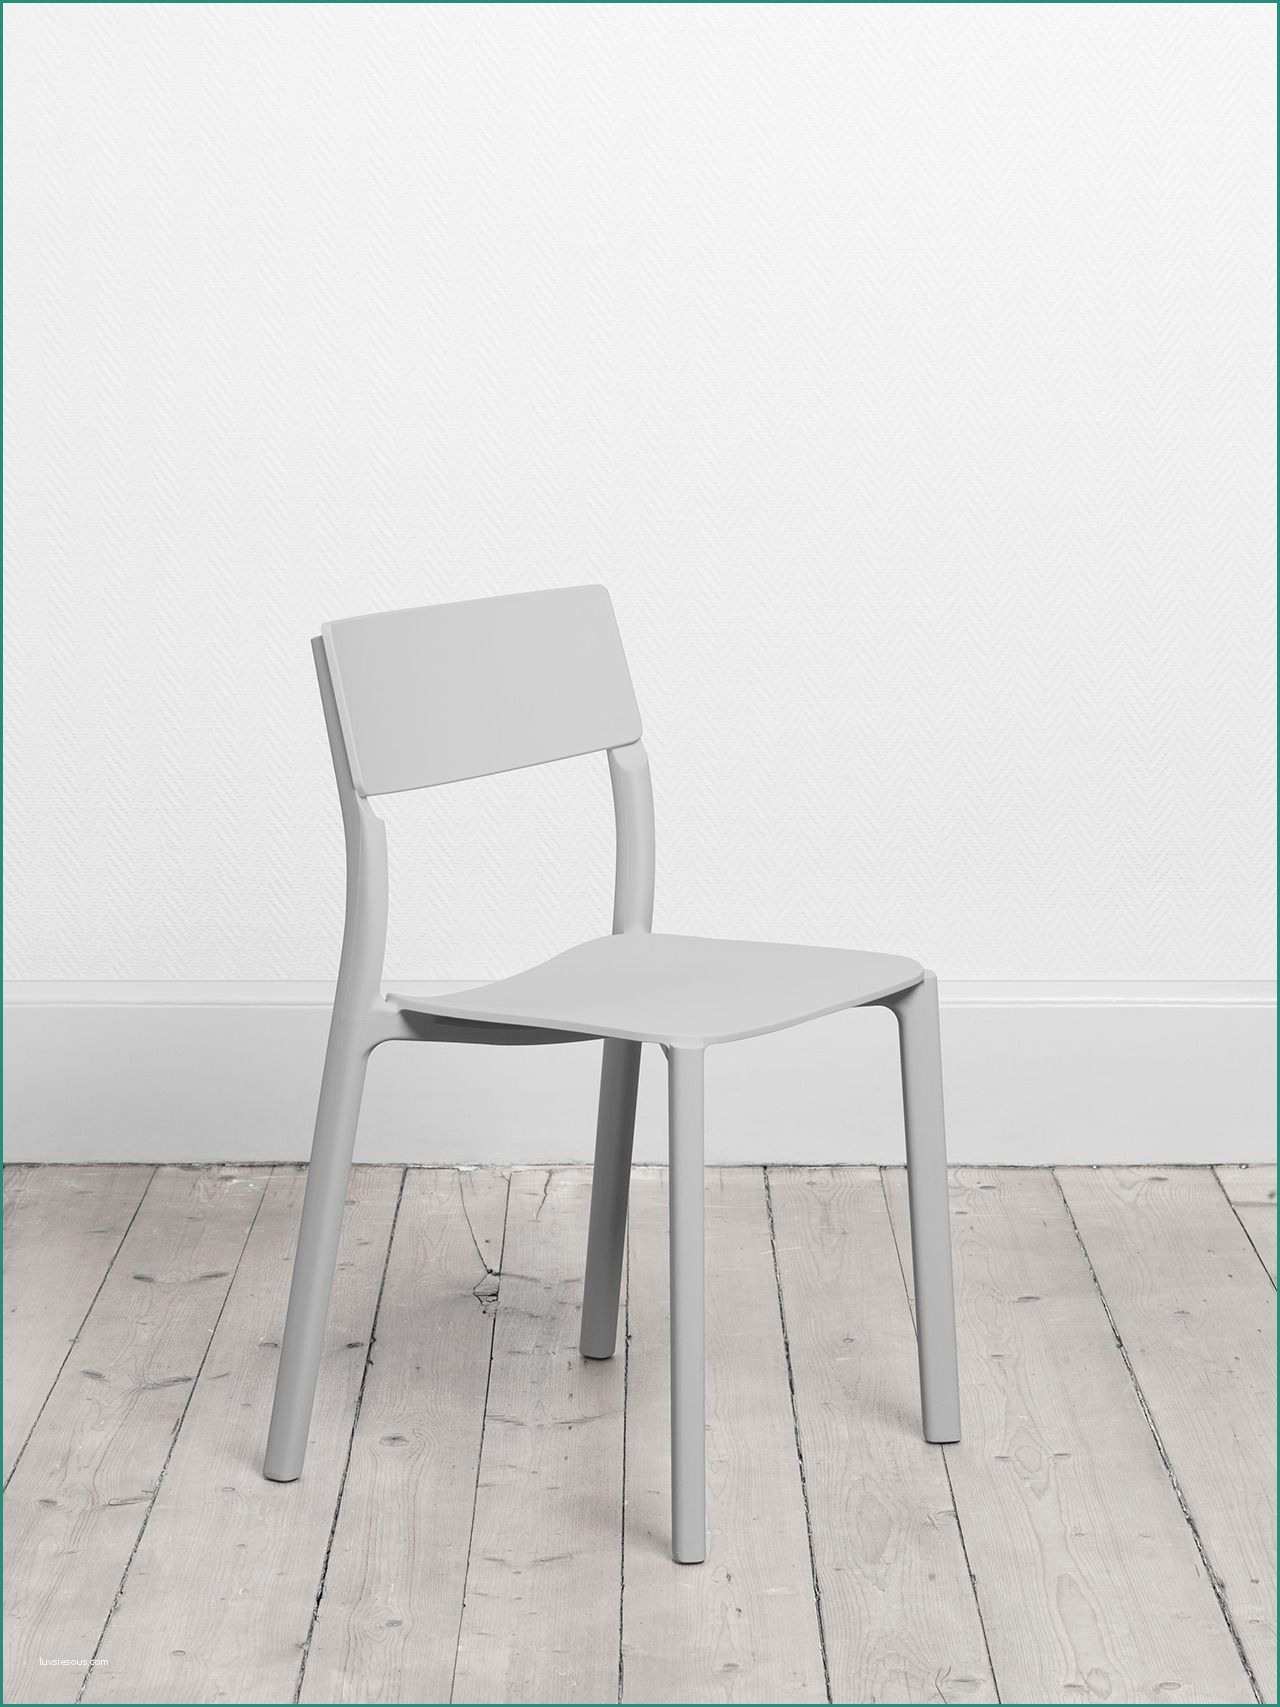 Sedia Design Bianca E form Us with Love for Ikea Janinge Chair